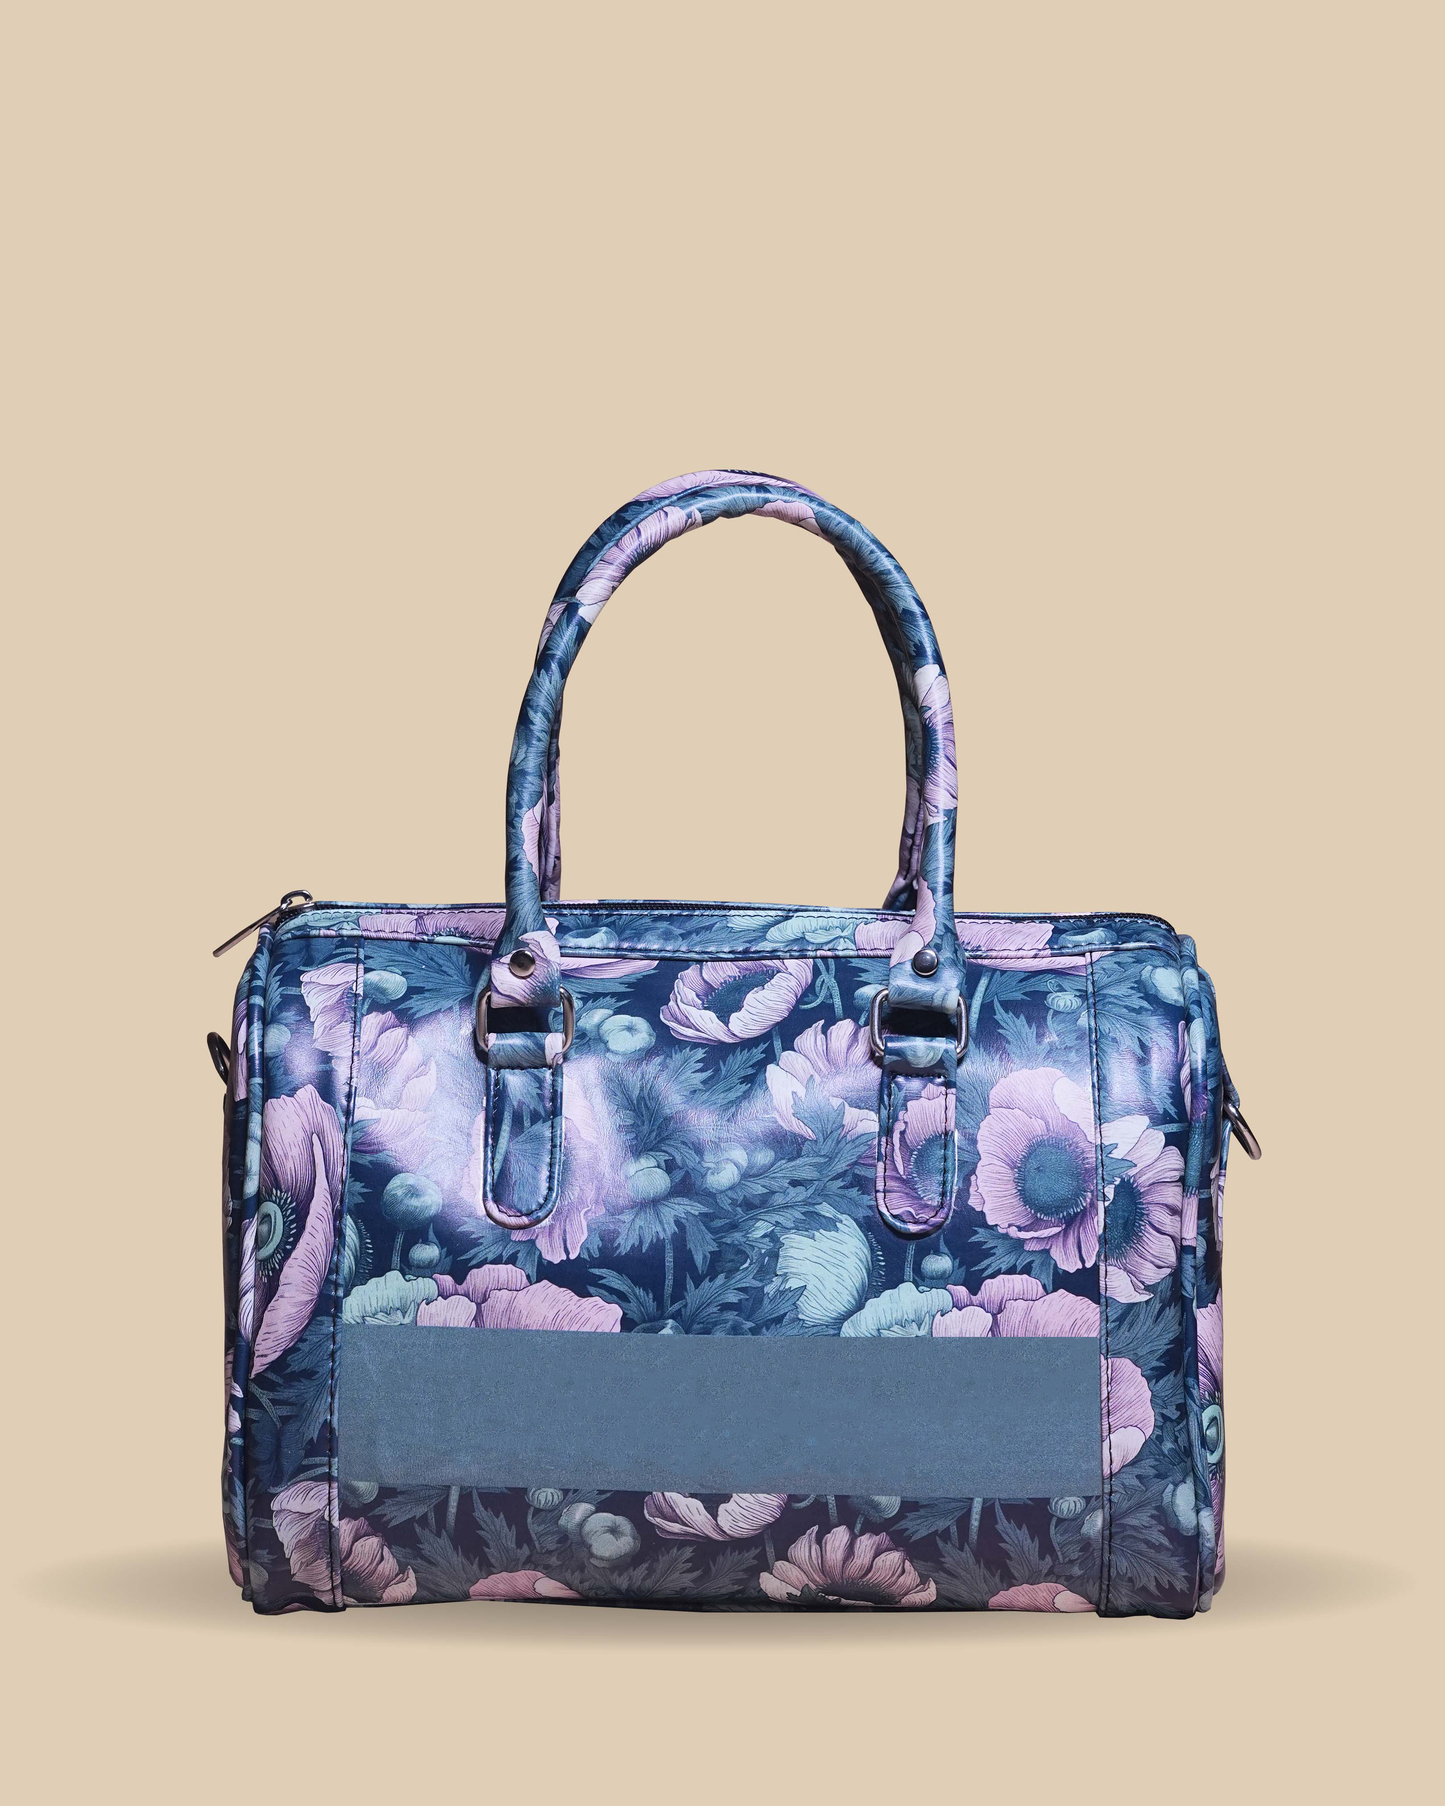 Customized Capsule Bag with Beautiful Flowers design